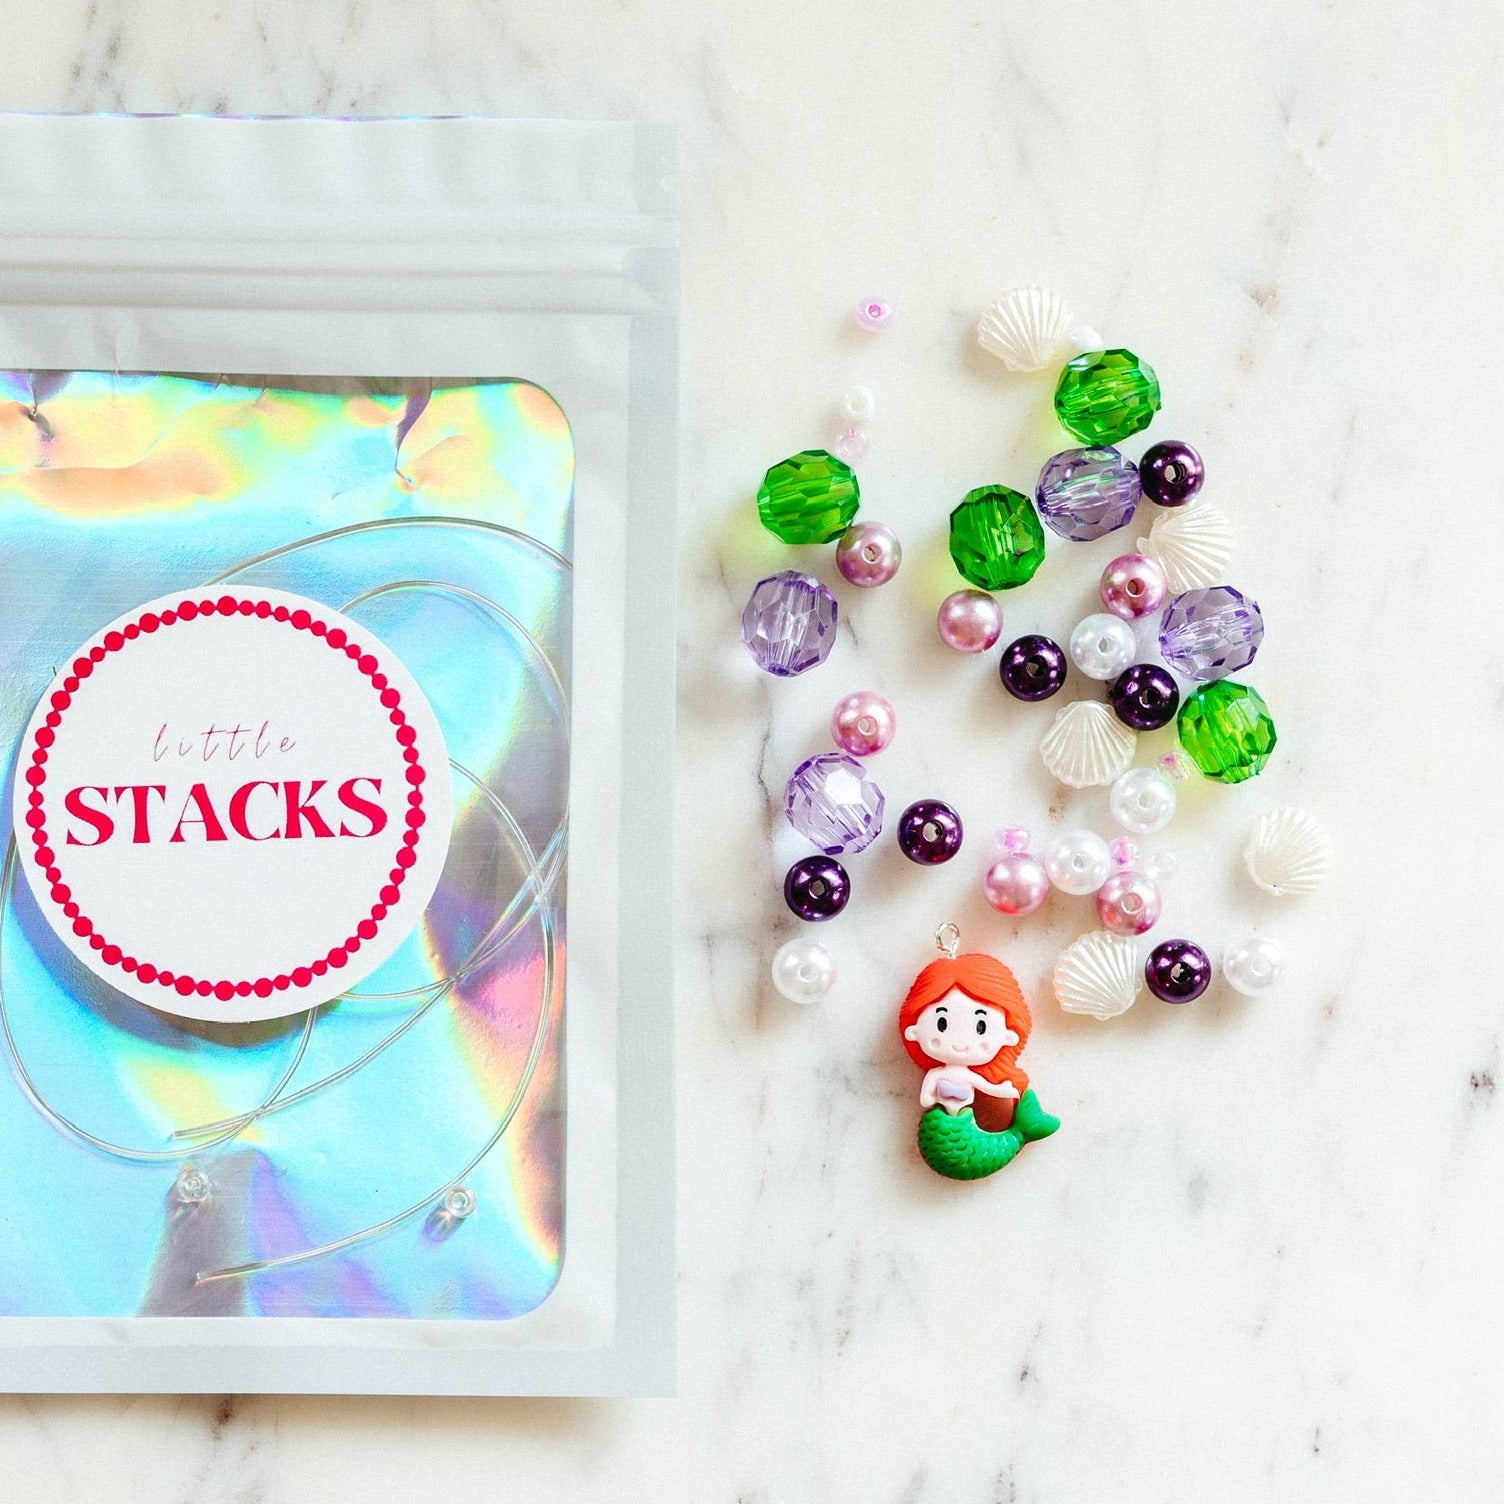 The Mermaid STACK – Little STACKS